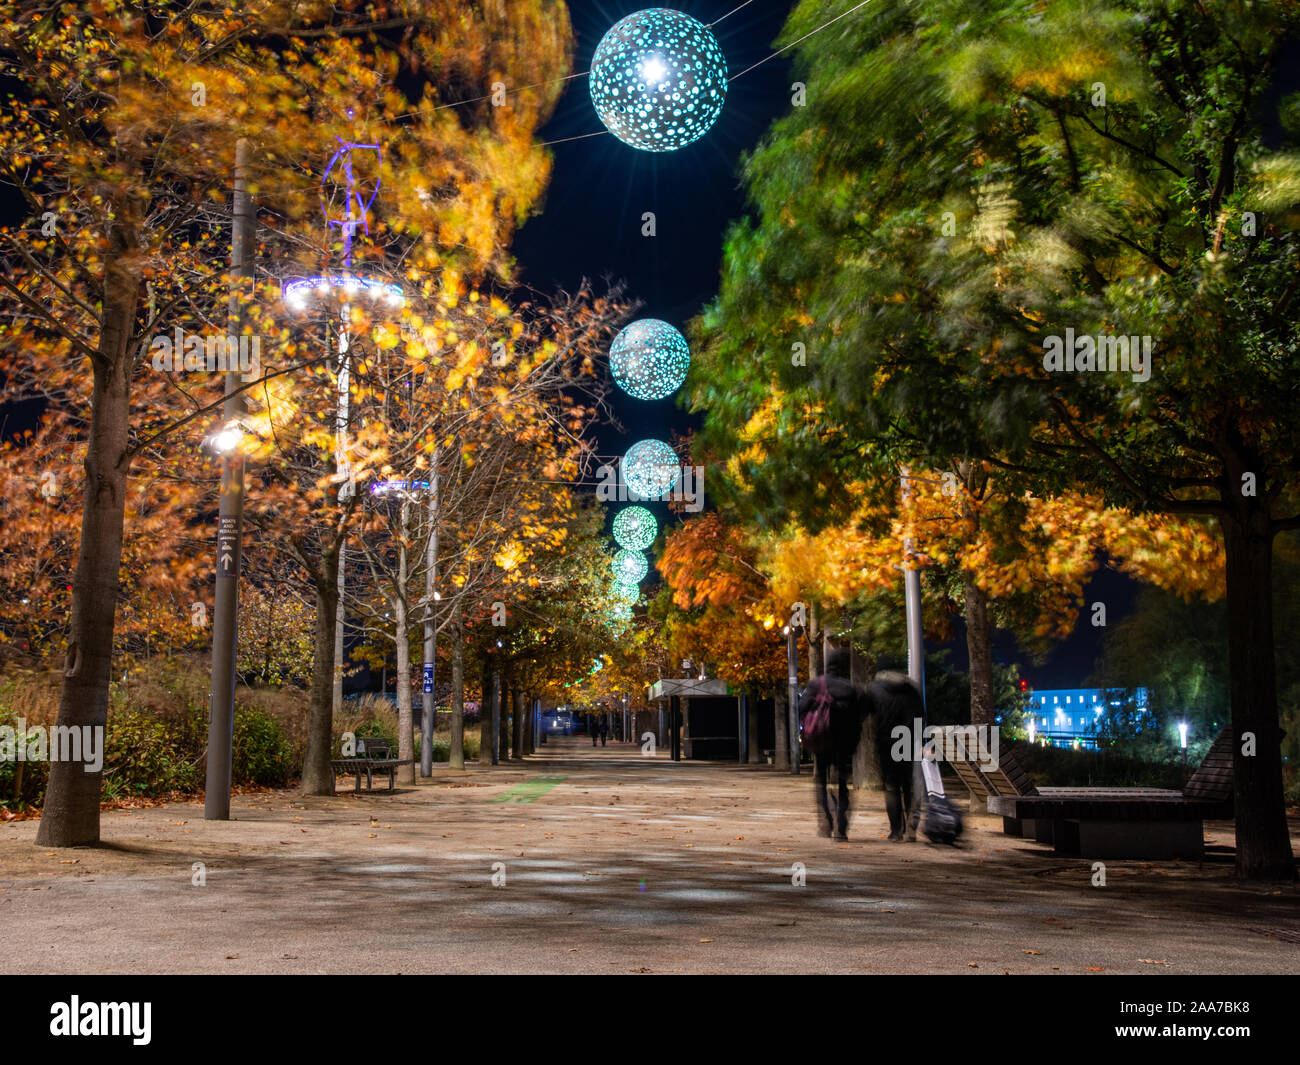 London, England, UK - November 11, 2019: Pedestrians walk along Tessa Jowell Boulevard under autumn trees swaying in the wind at night in London's Que Stock Photo